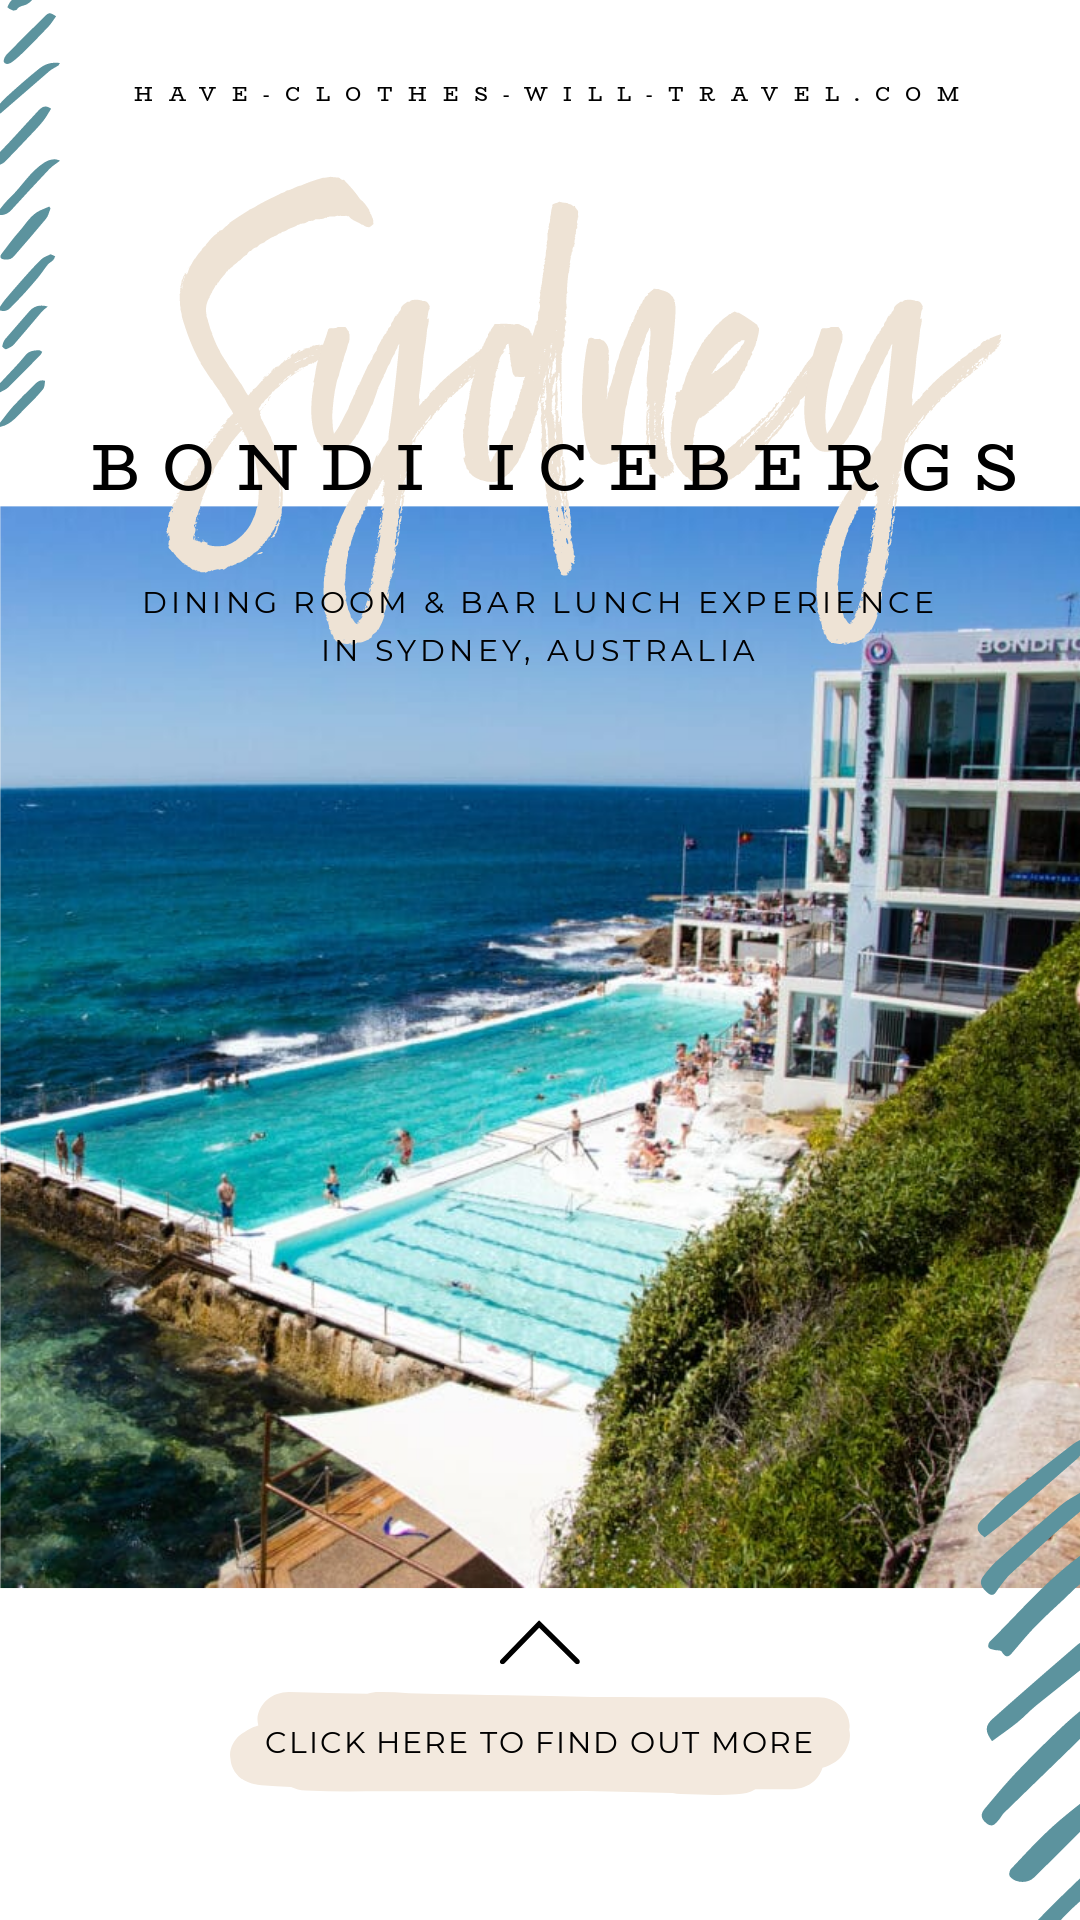 A view of the famous Bondi Icebergs dining room & bar's pool and view overlooking the Pacific Ocean. Text across the image says, "Sydney Bondi Icebergs Dining Room & Bar lunch experience in Sydney, Australia"